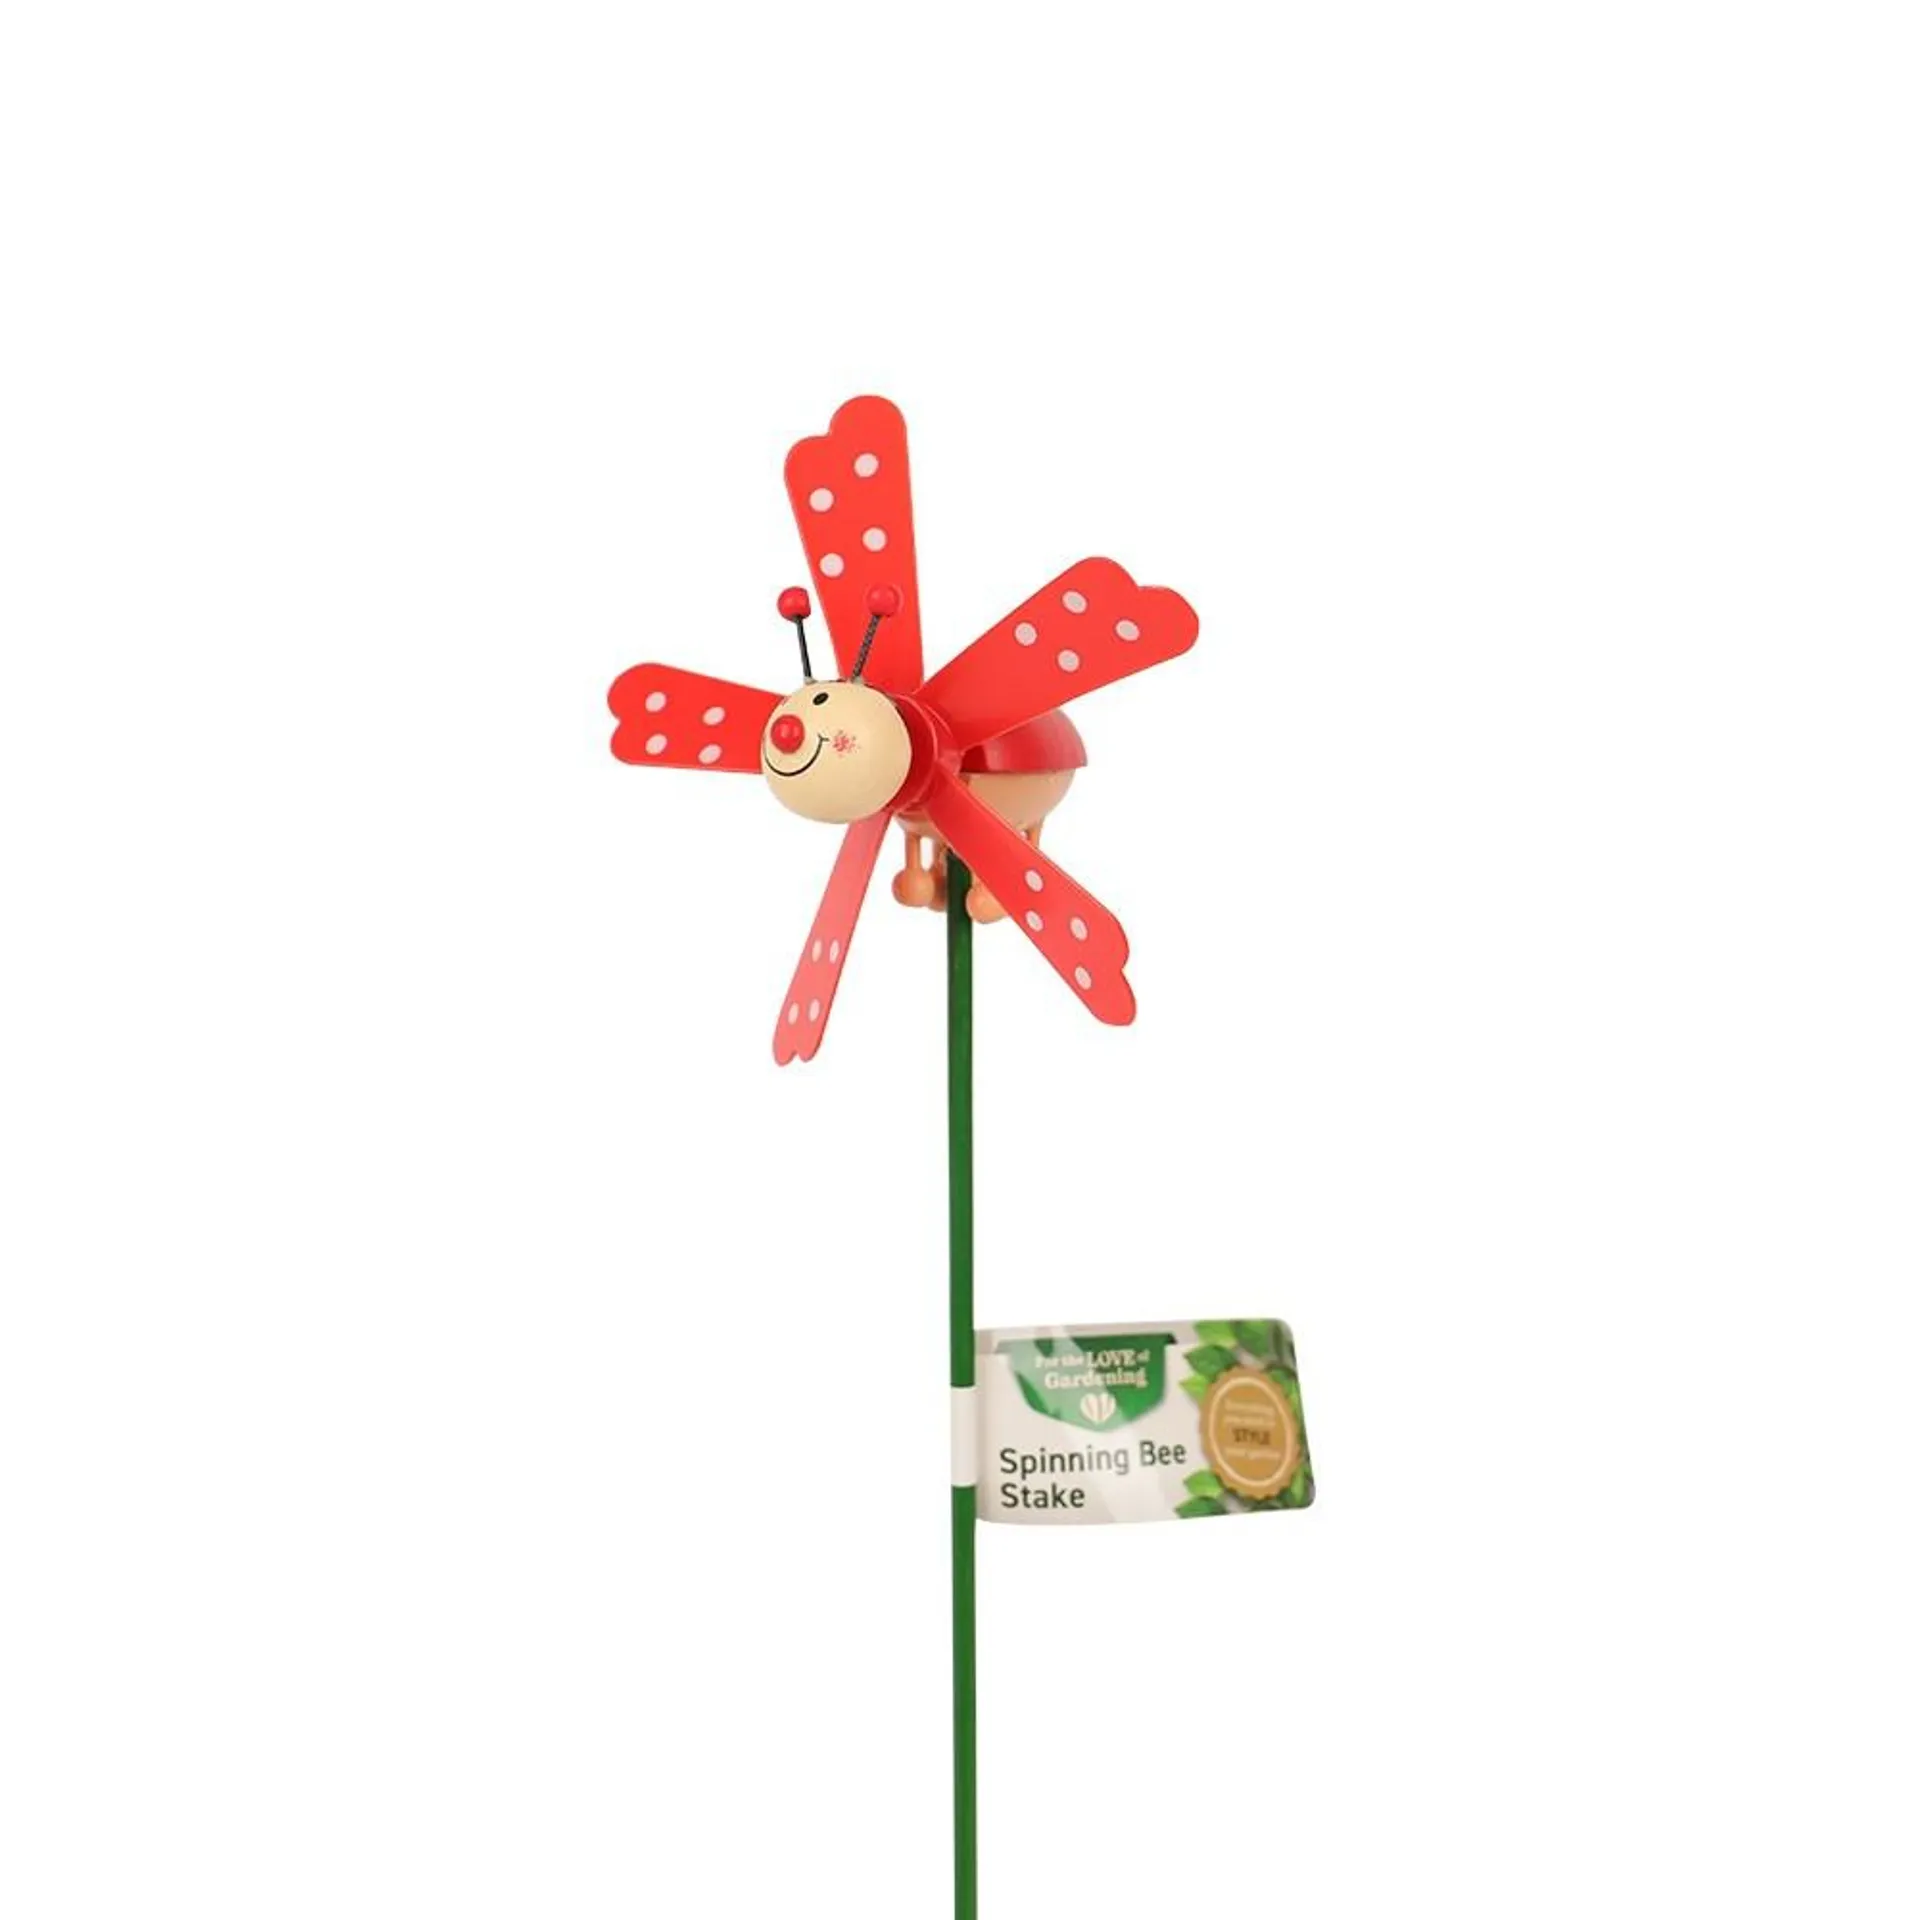 DECORATIVE SPINNING BEE STAKE - RED